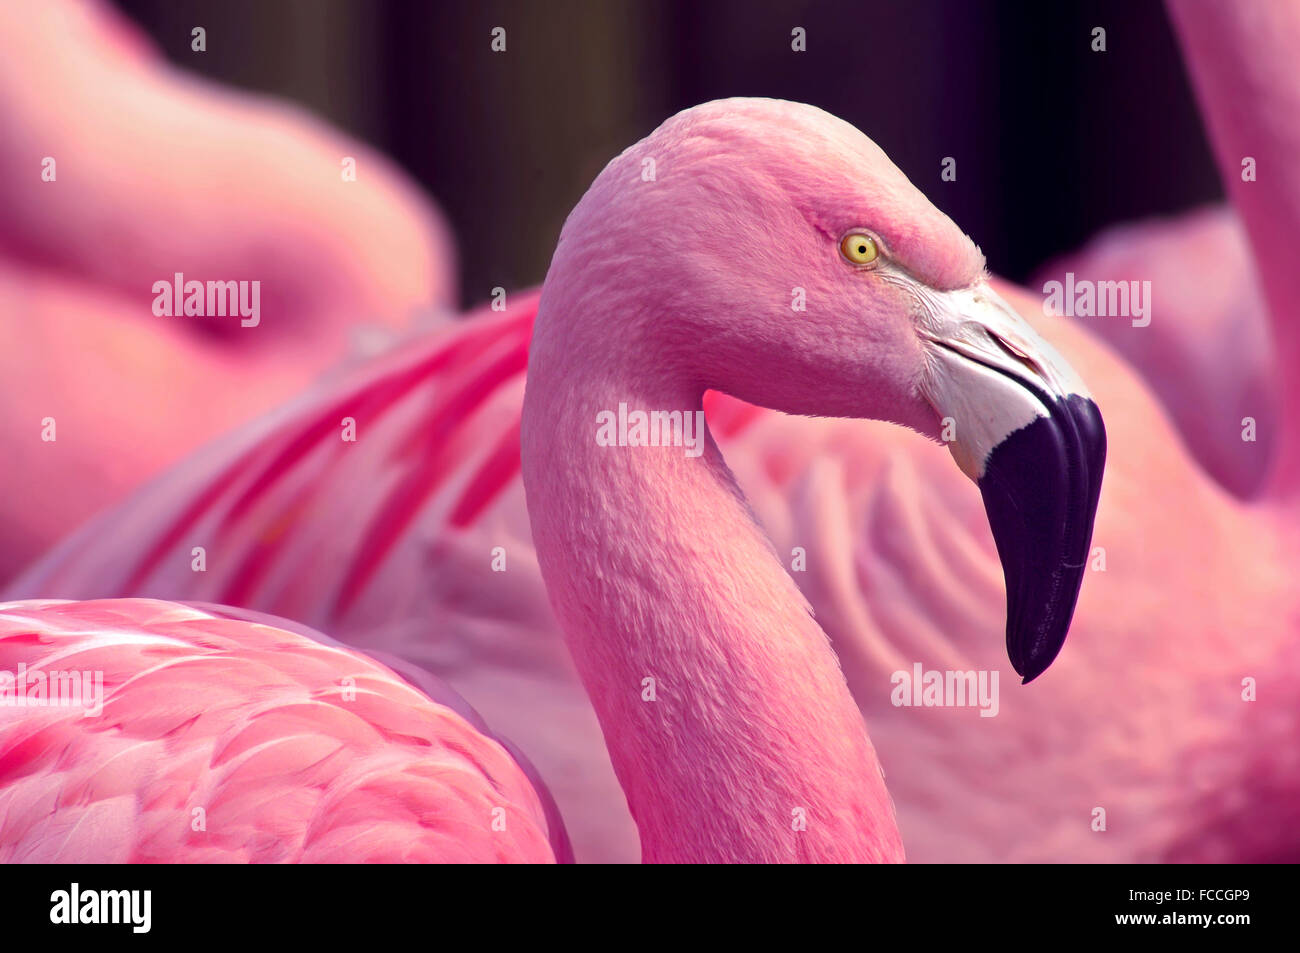 Chilean Flamingo Side Perspective Stock Photo